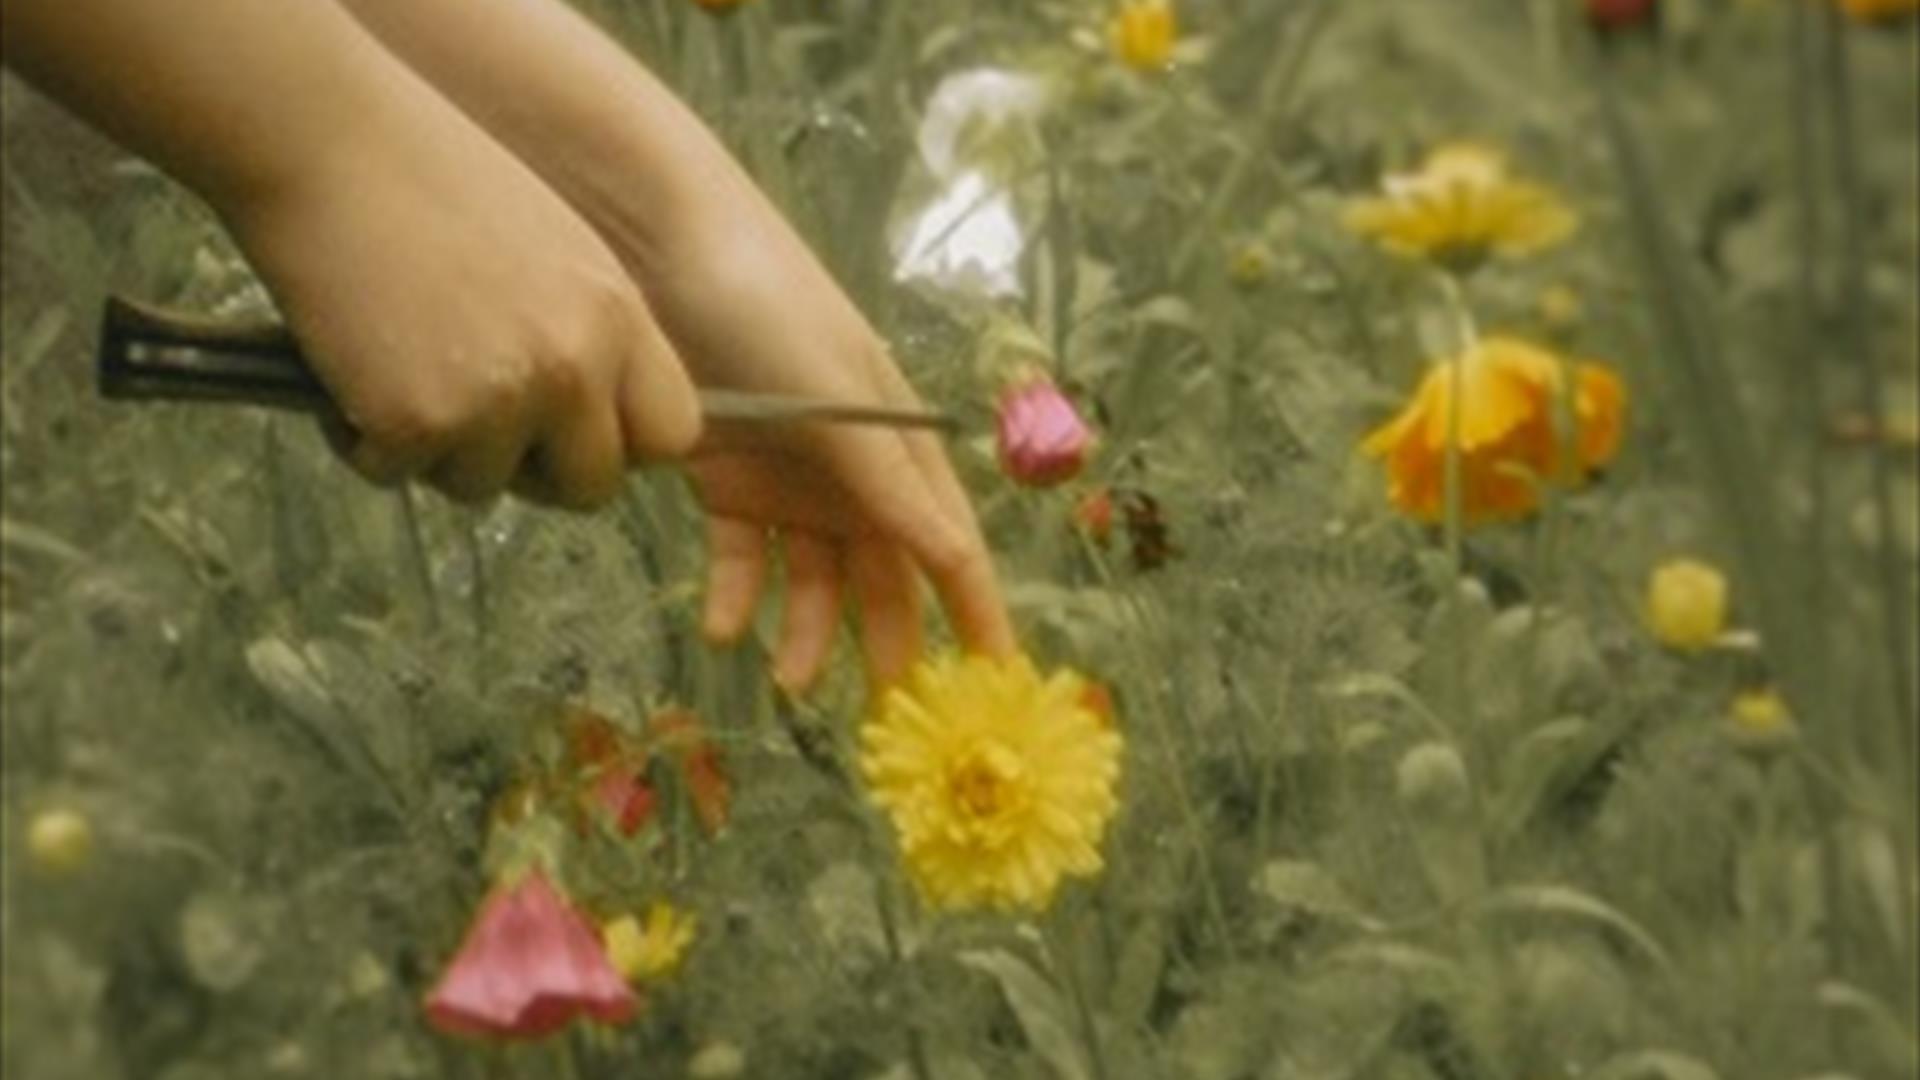 Two hands with a knife to cut flowers